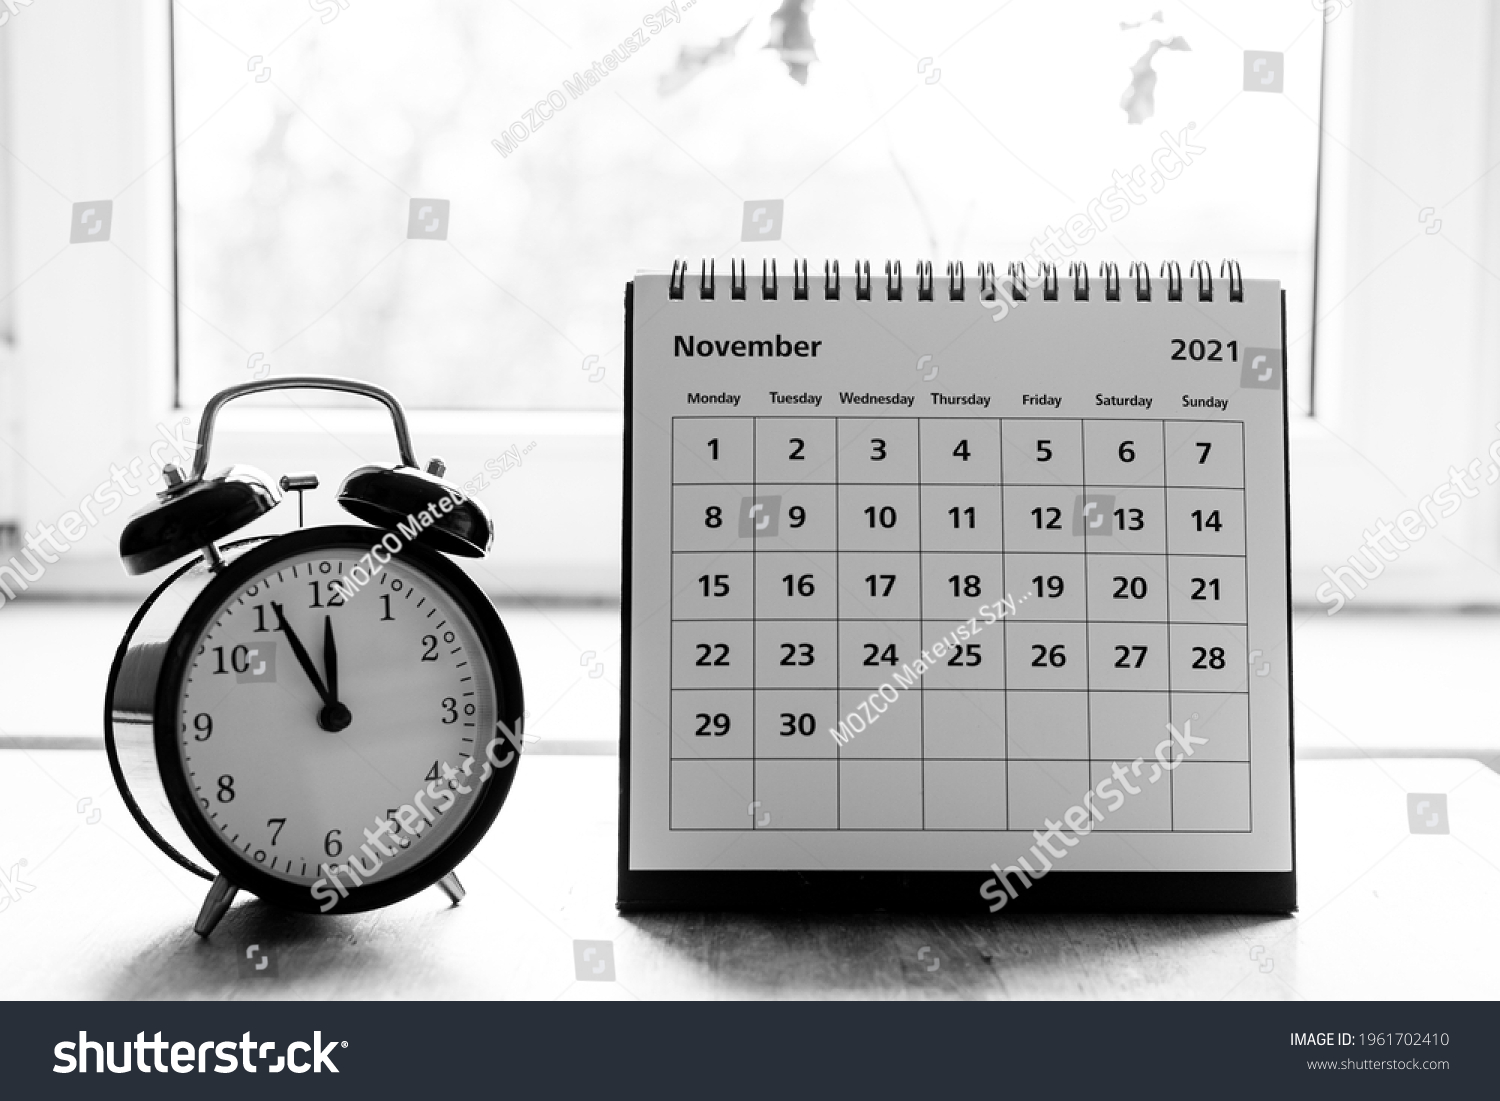 November 2021 grayscale calendar - month page showing date on wooden table #1961702410